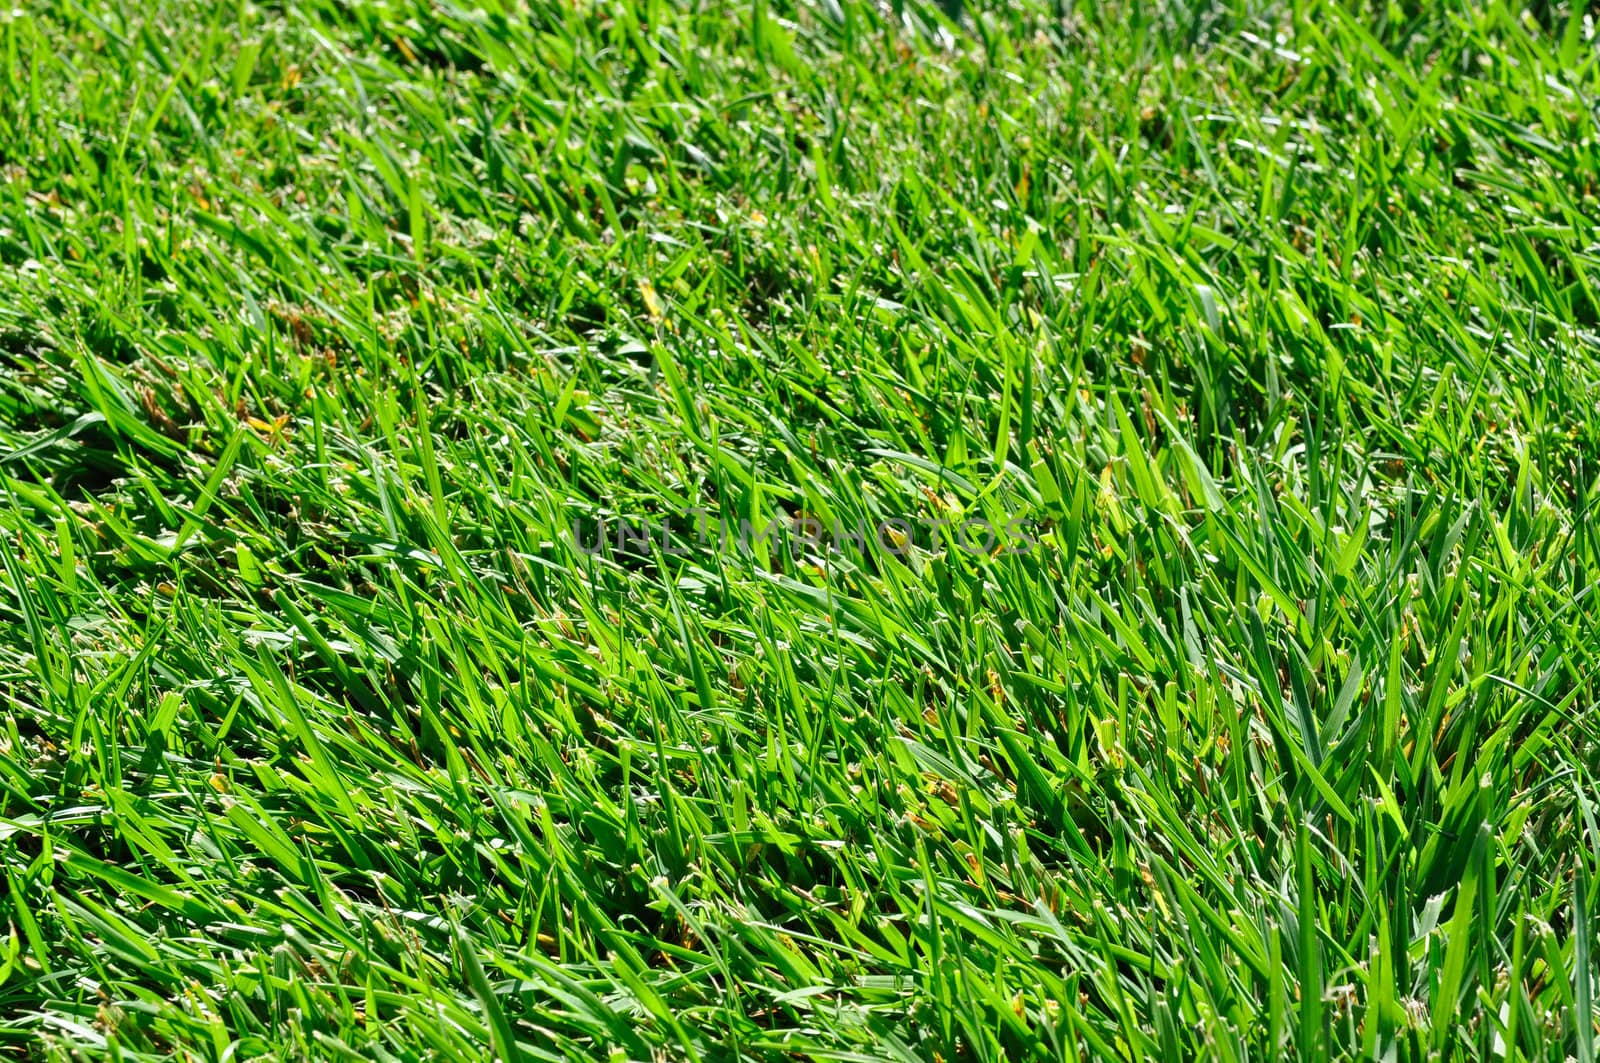 Closeup of a green grass field. Shallow depth of field. Focus is around the bottom of the image. Top is out of focus.